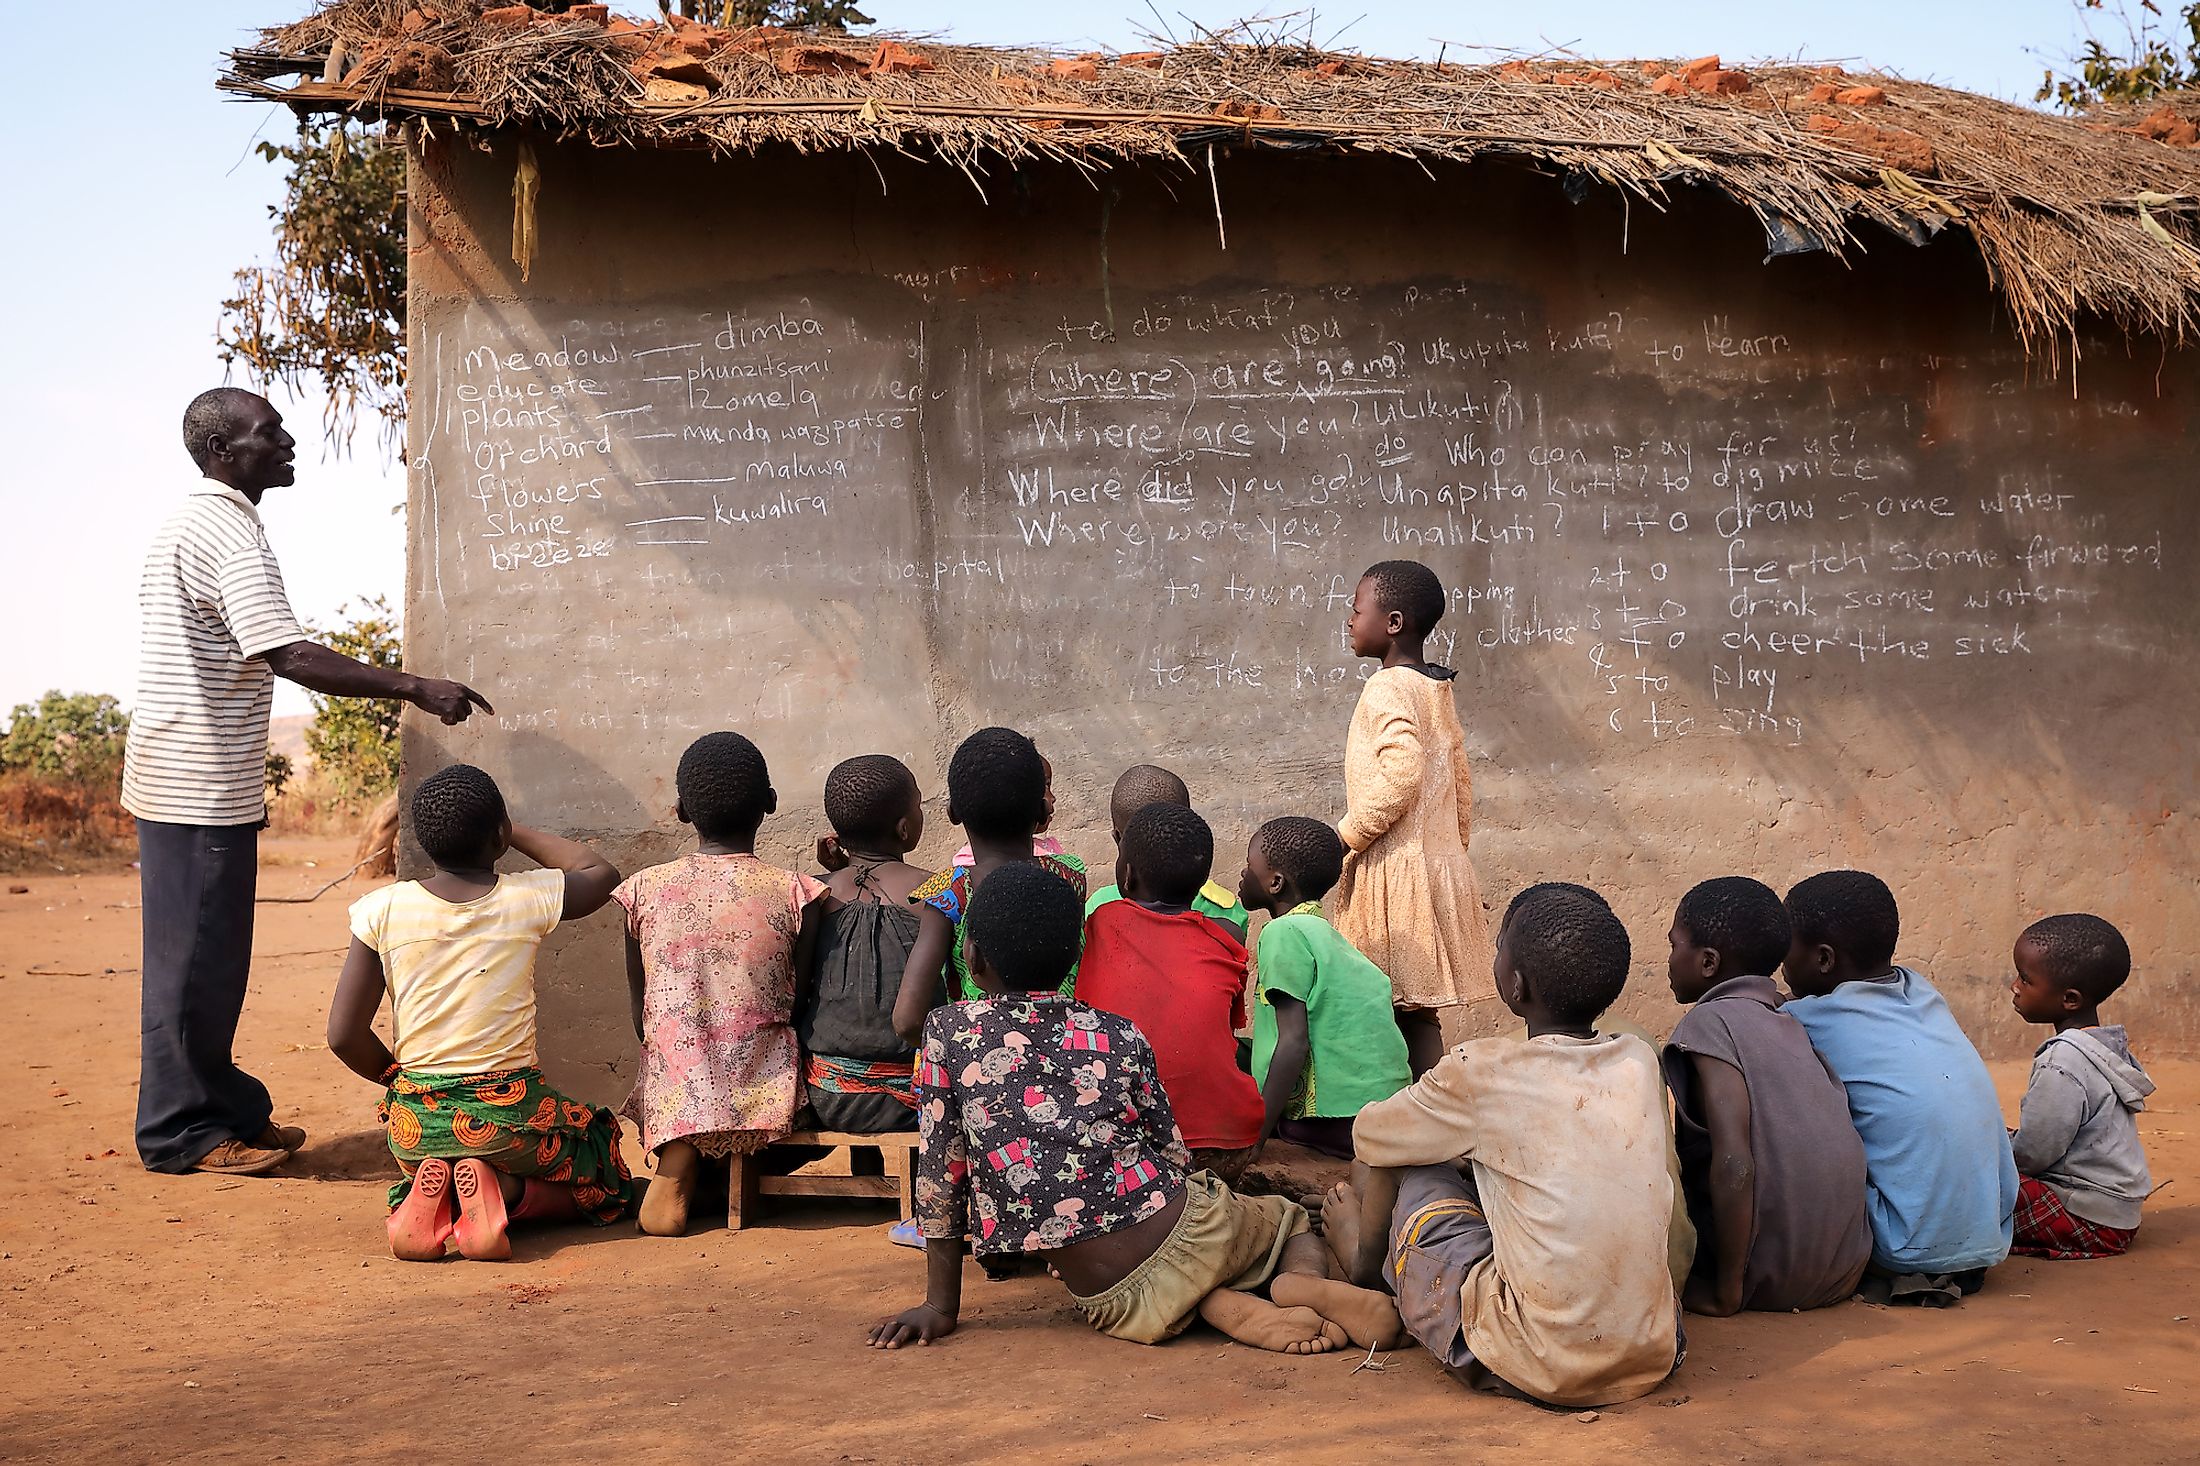 A school in Malawi, one of Africa's poorest nations. Editorial credit: Dietmar Temps / Shutterstock.com